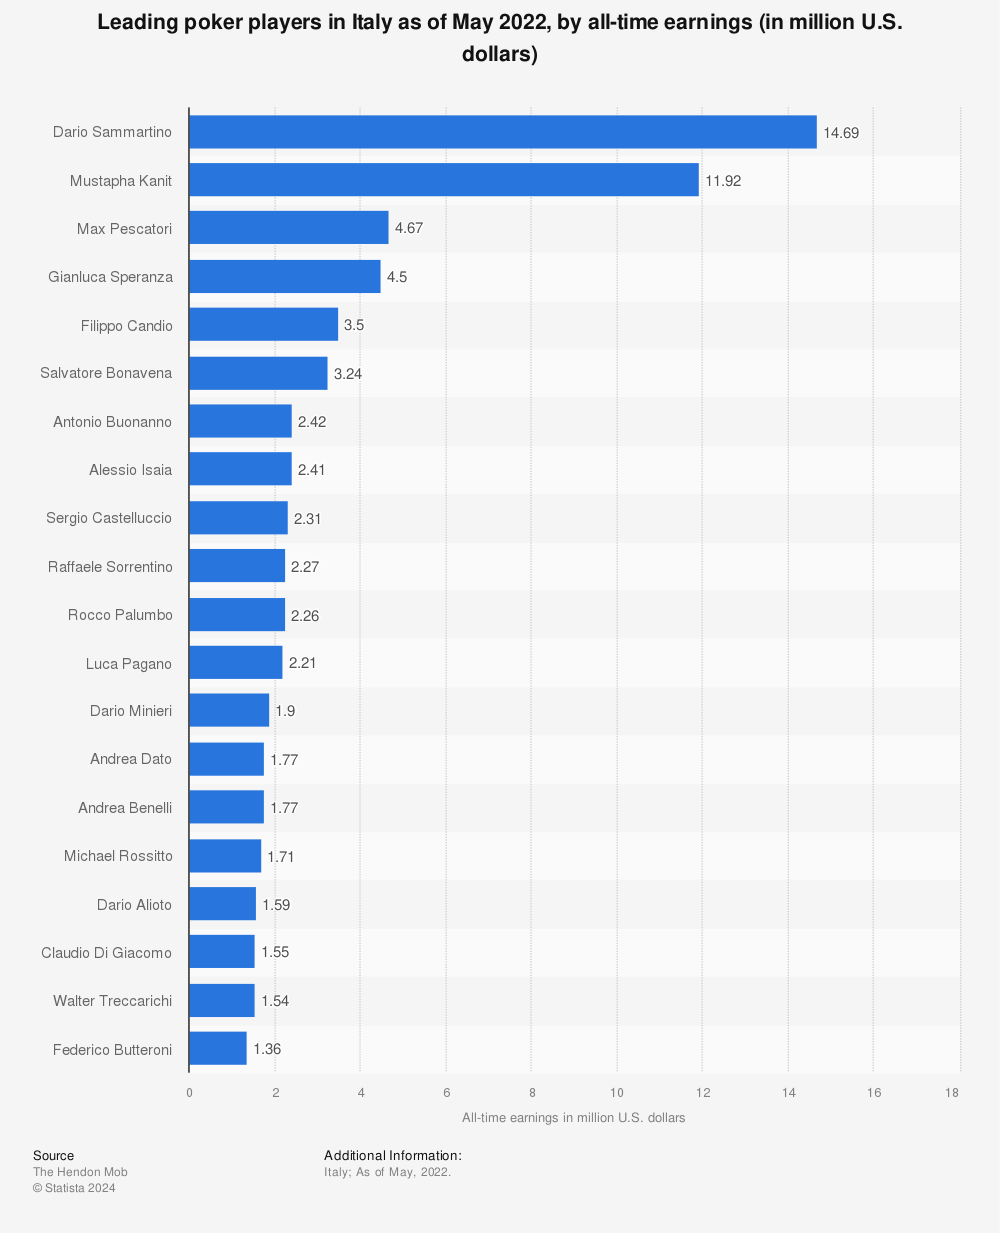 Statistic: Leading poker players in Italy as of May 2022, by all-time earnings (in million U.S. dollars) | Statista